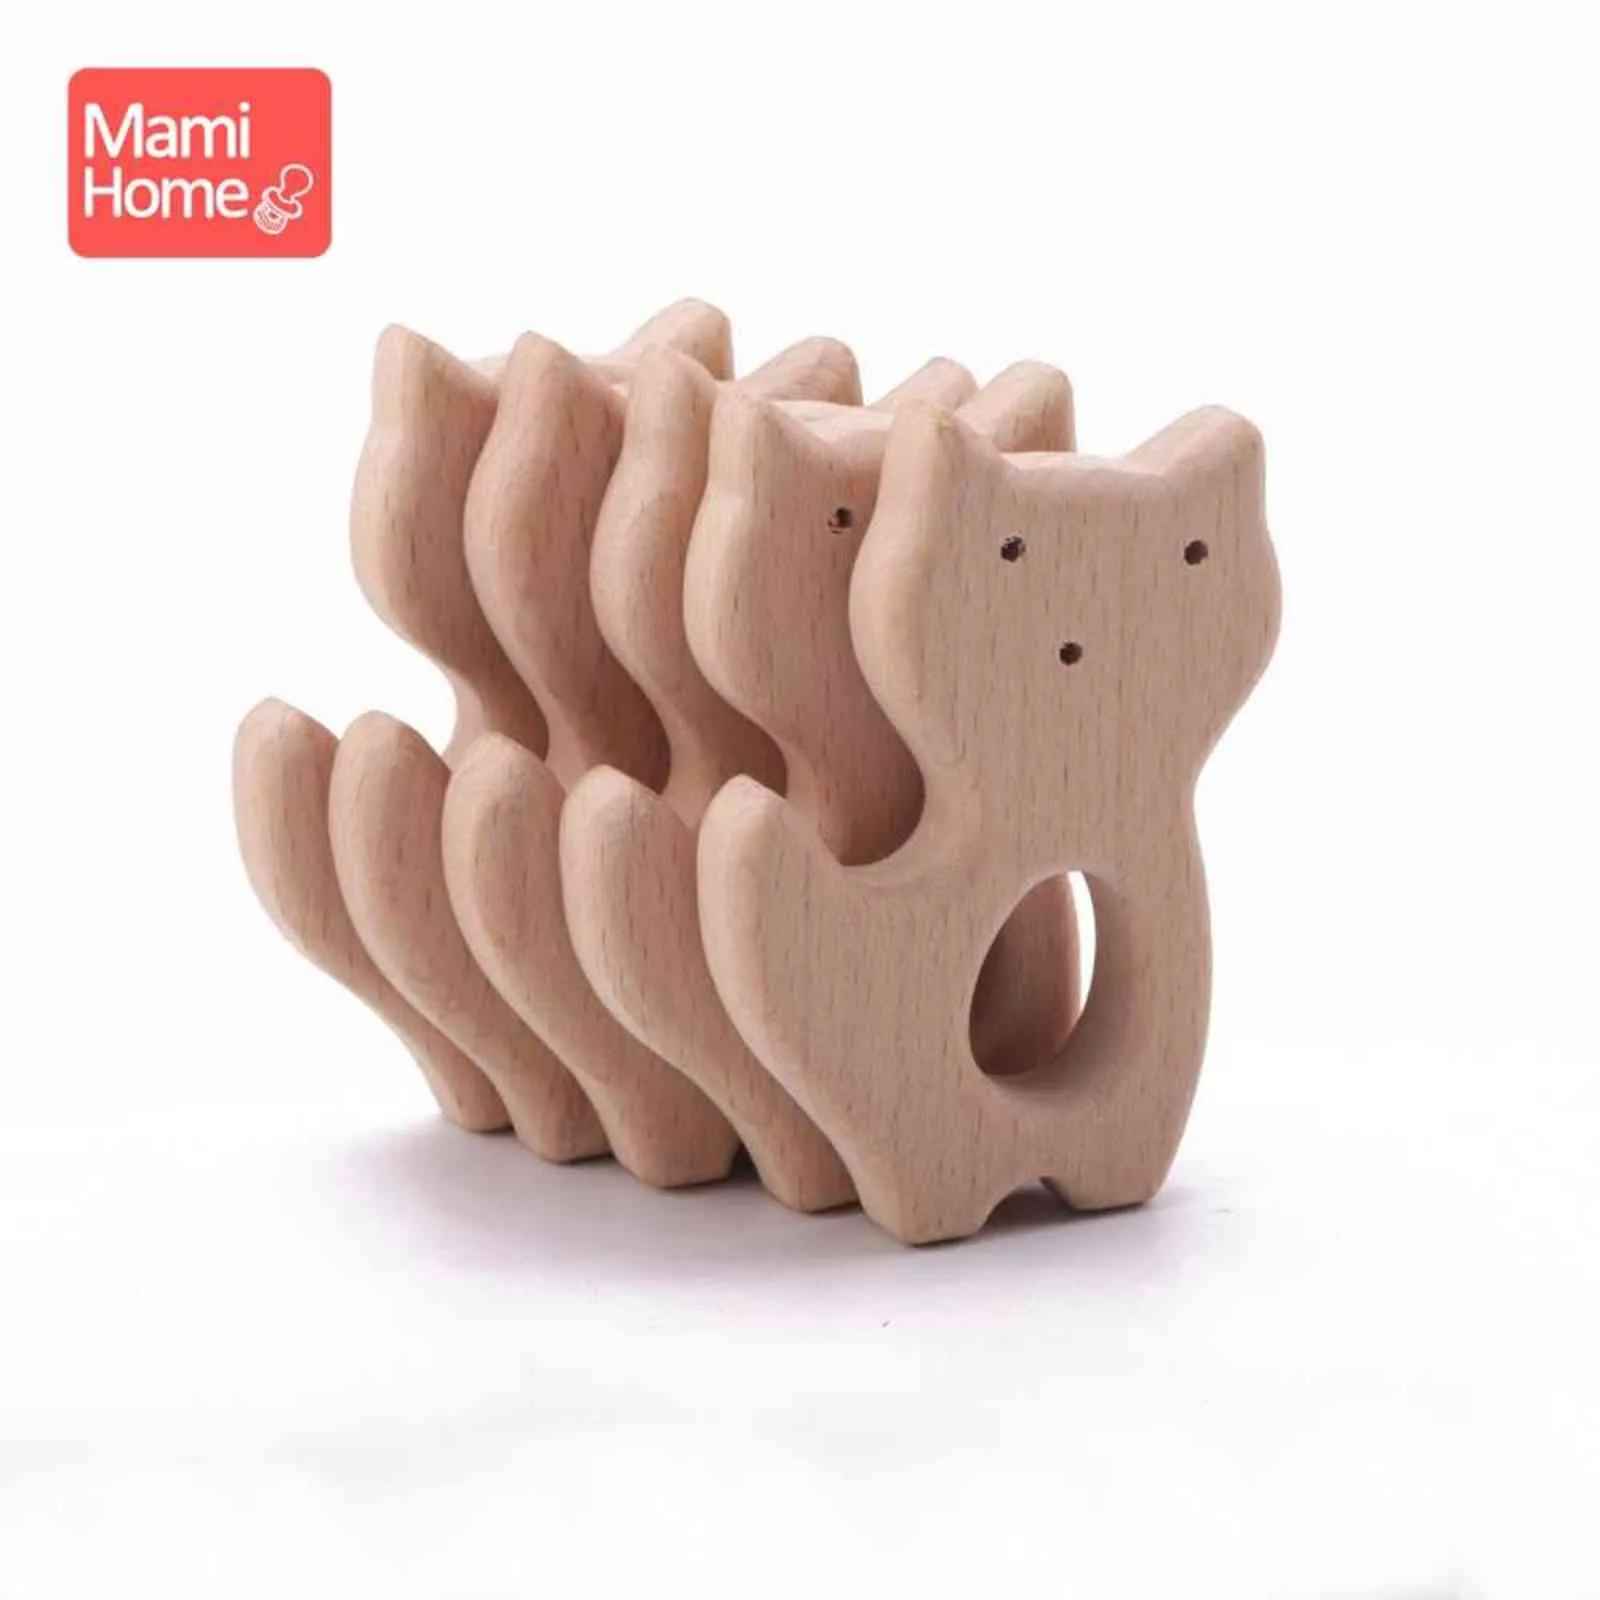 Baby Wooden Teether Animal Beech Pacifier Pendant BPA Wood Teeth Blank Rodent Teether Toy Nursing Gift Children039s G5357307